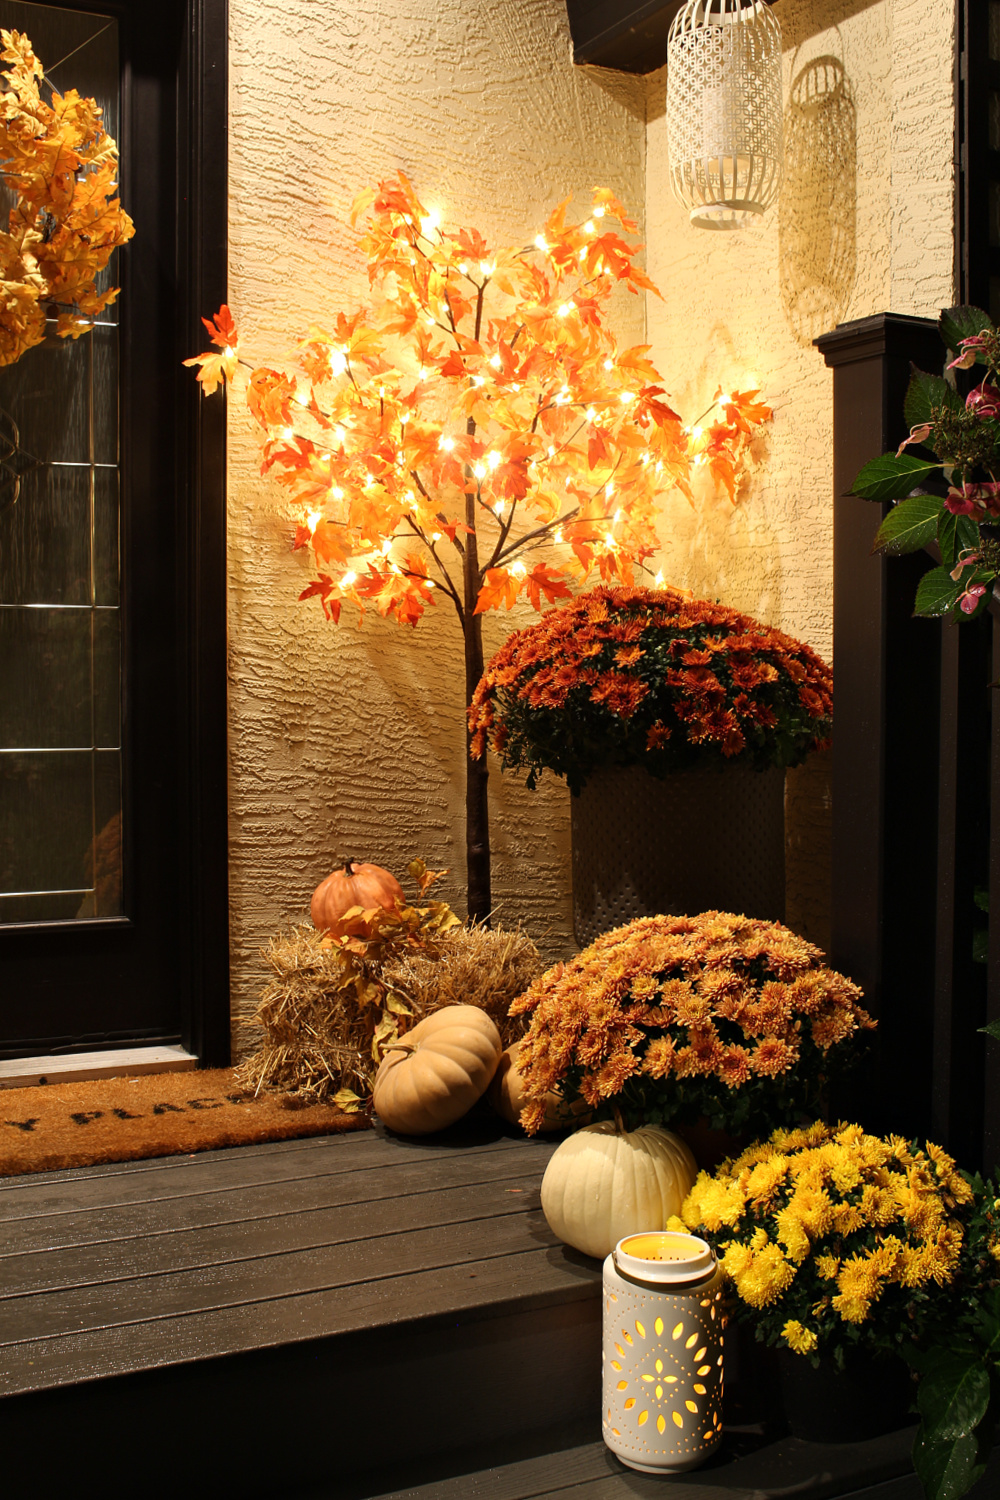 Glowing fall front porch at night with a lighted fall tree and candles.